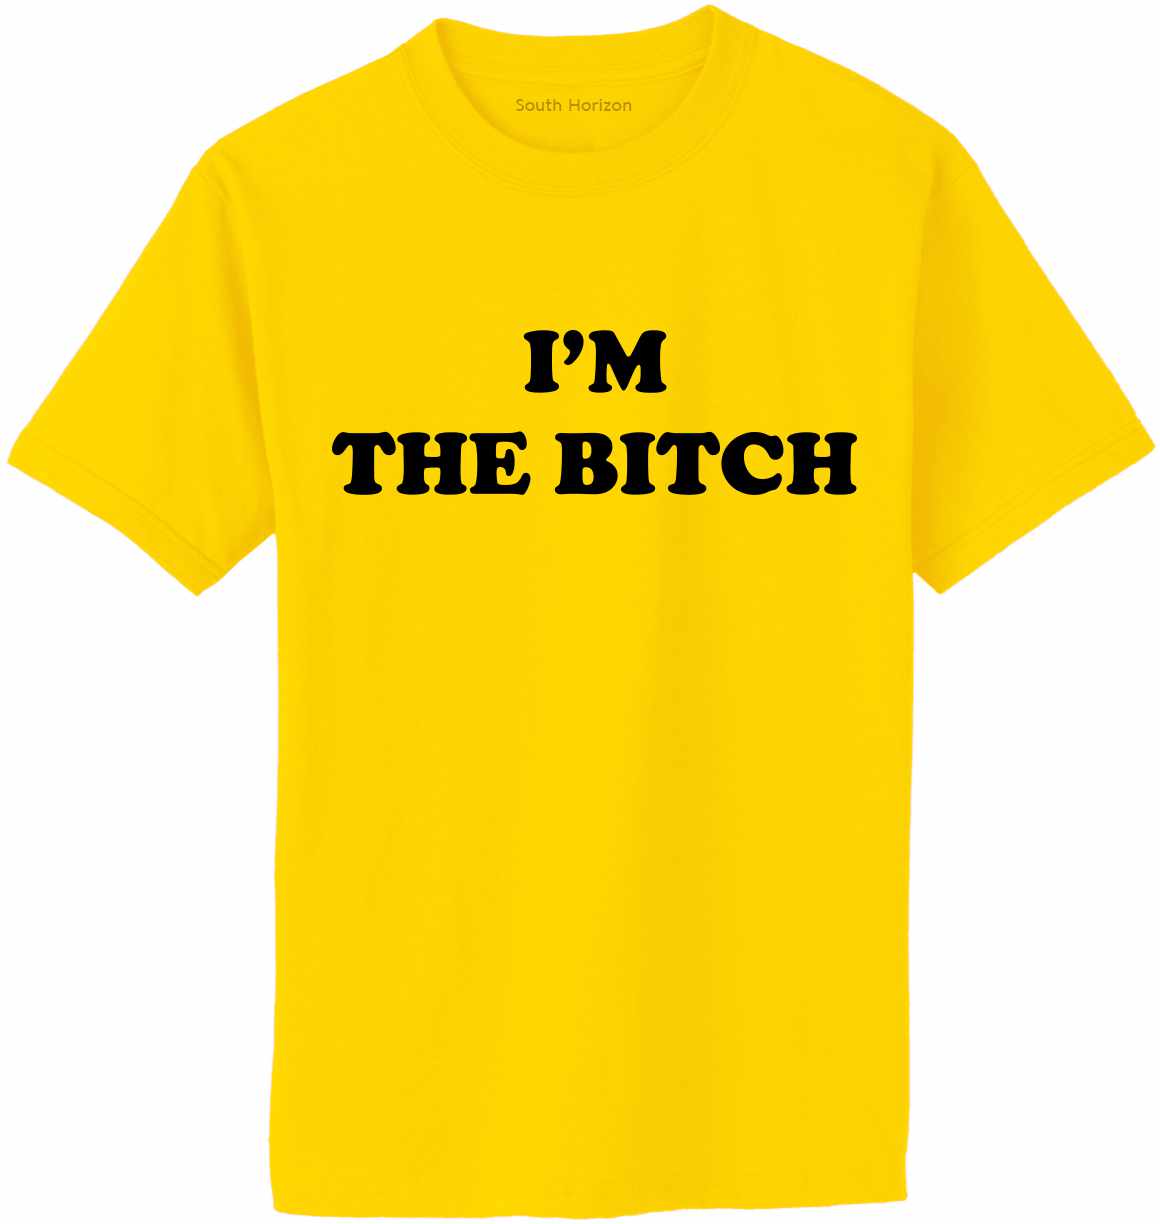 I'M THE BITCH on Adult T-Shirt (#1394-1)